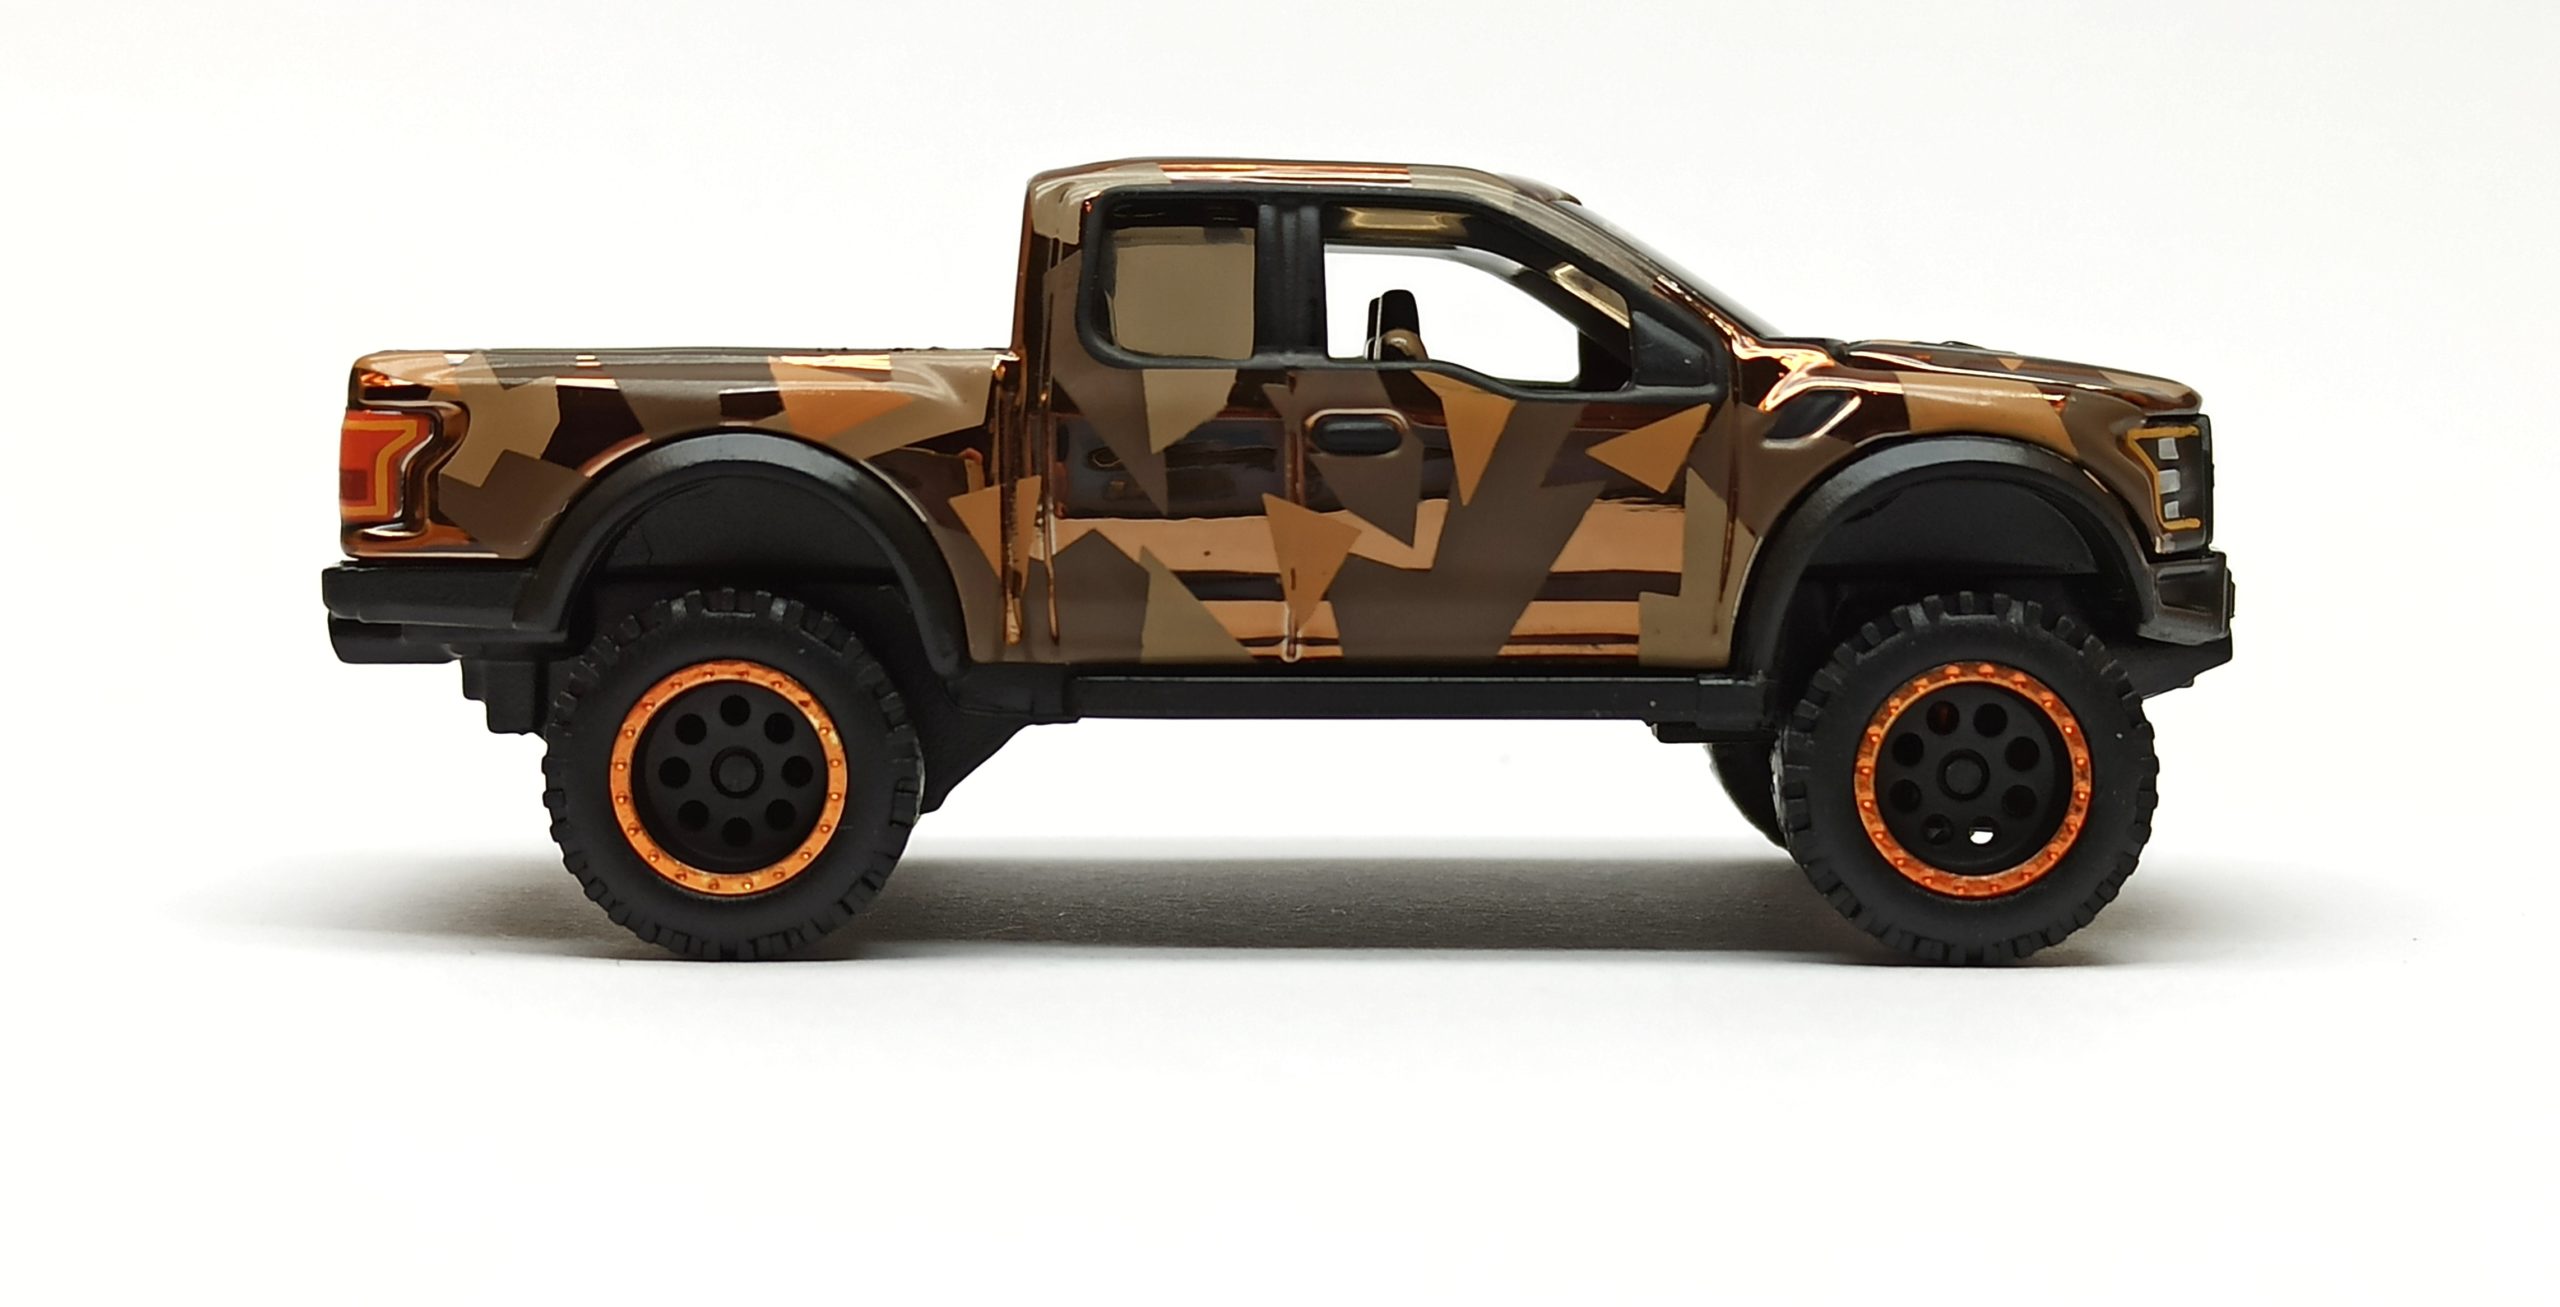 Hot Wheels '17 Ford F-150 Raptor (HCK31) 2021 RLC Exclusive (1 of 25.000) spectraflame light brown (desert camo pattern)